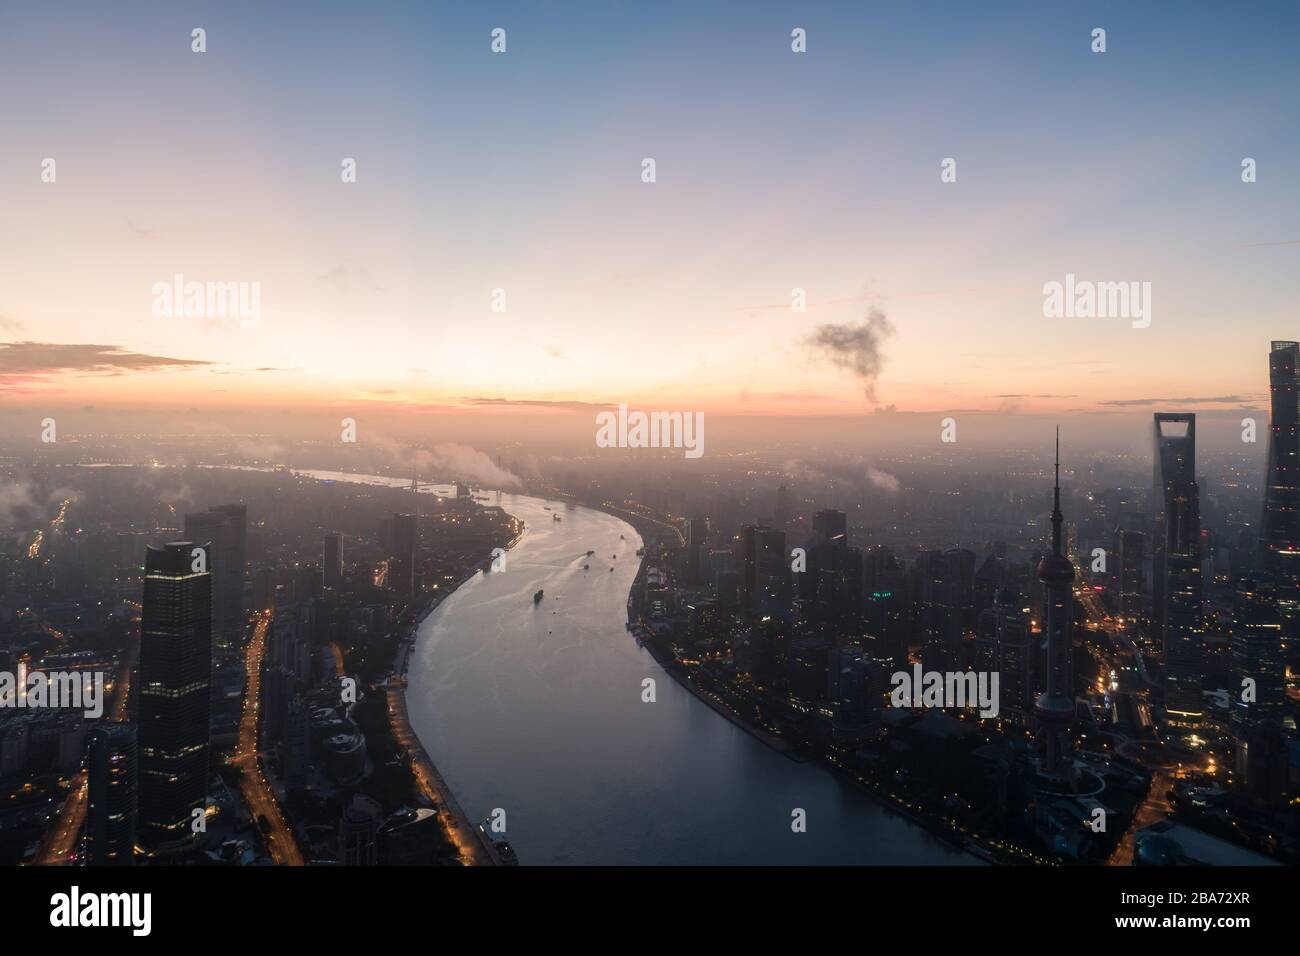 Aerial view over The Bund, Shanghai Stock Photo